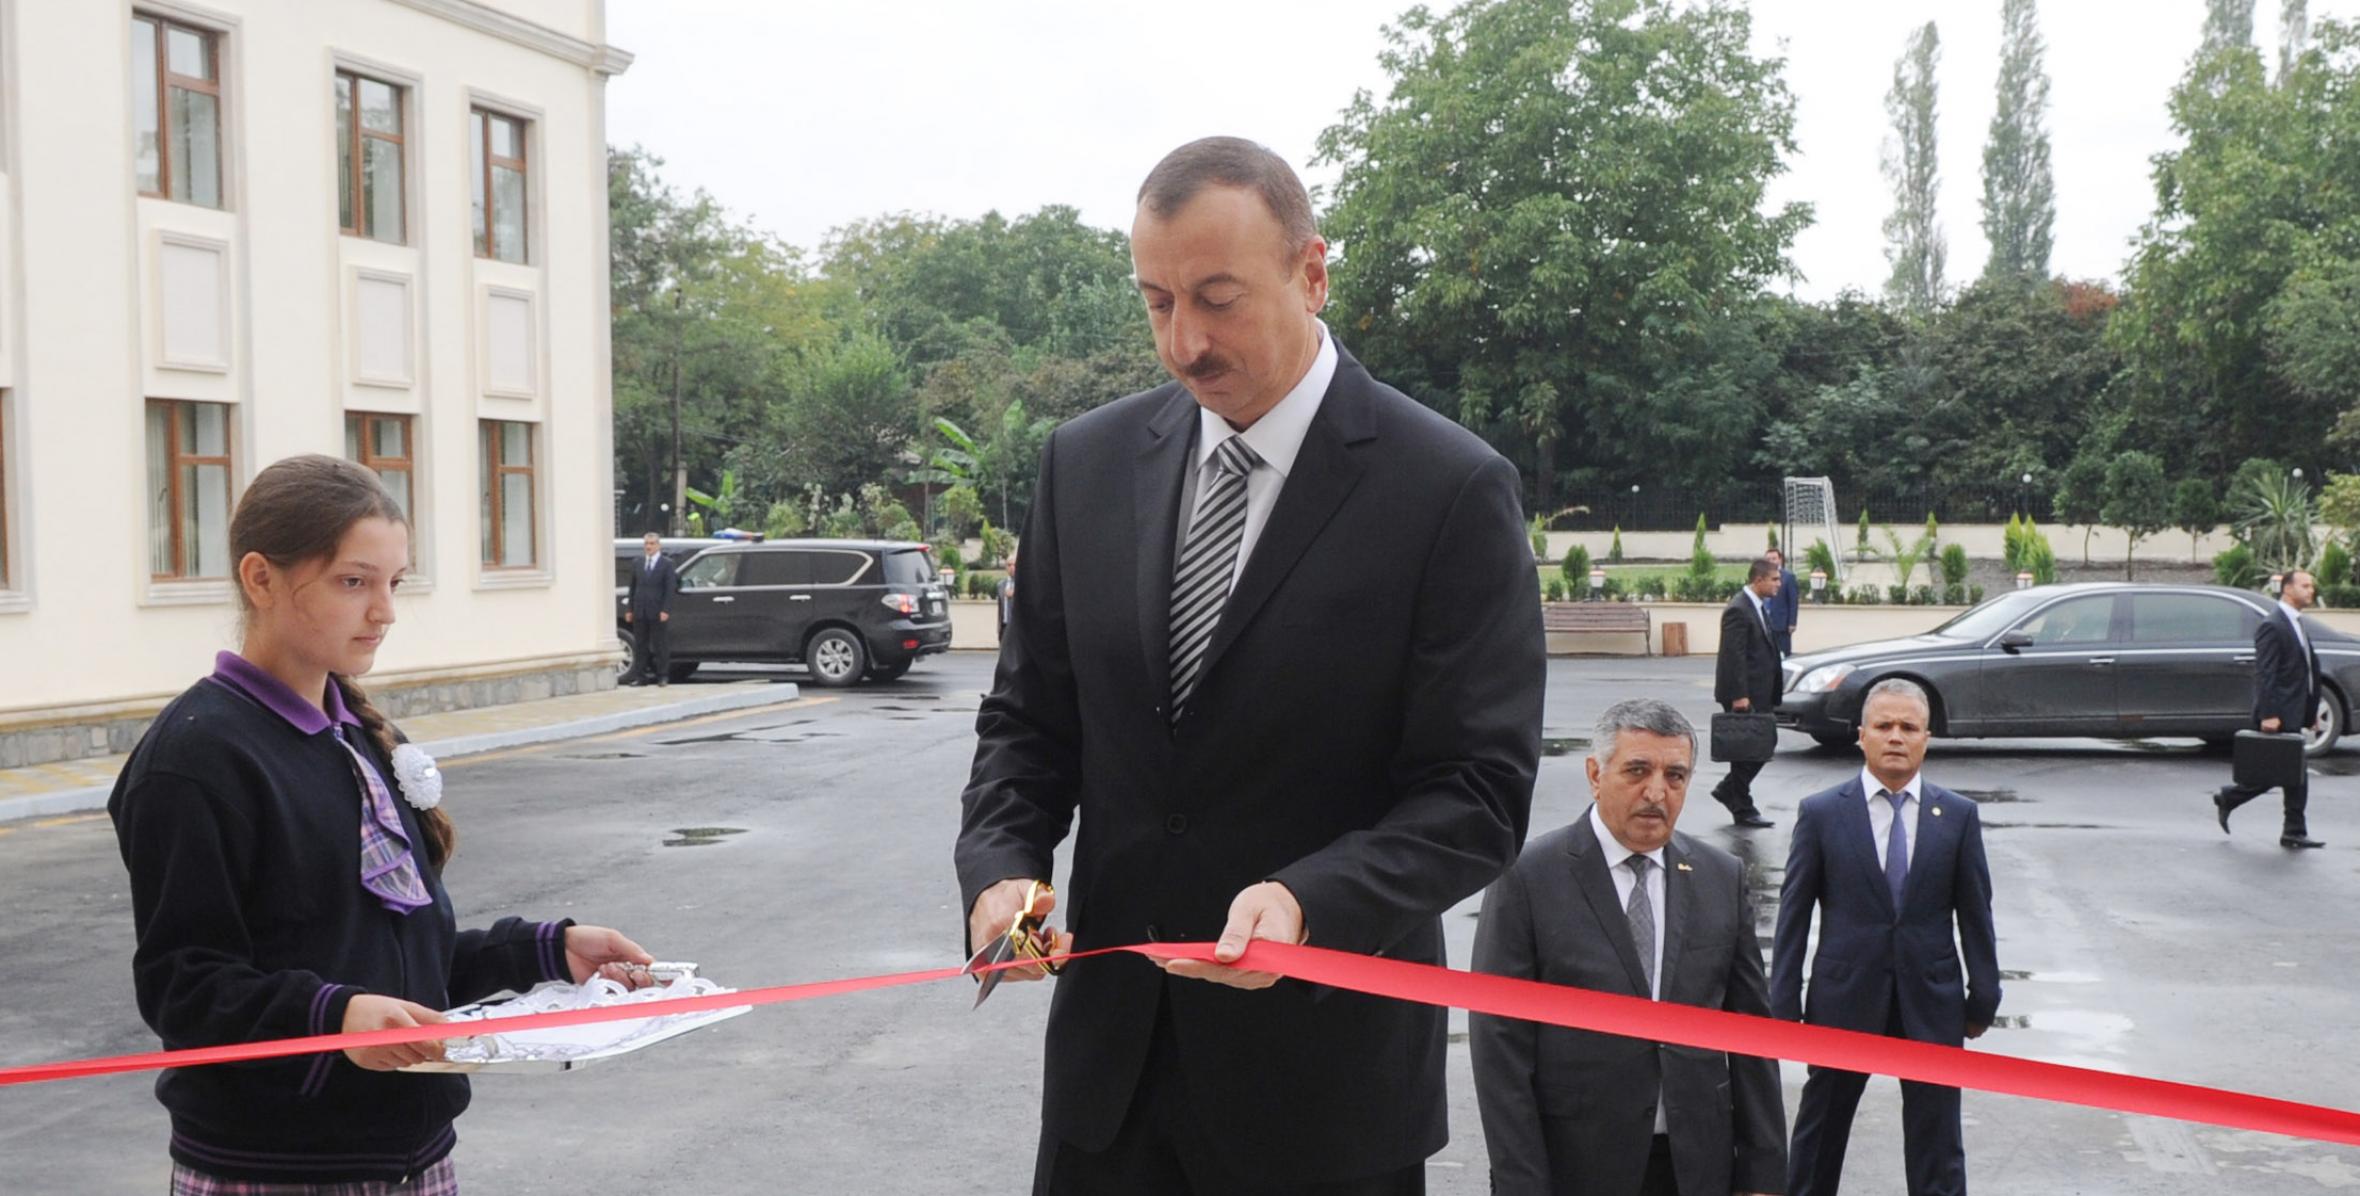 Ilham Aliyev attended the opening of a secondary school in the Gozbarakh village of Zagatala